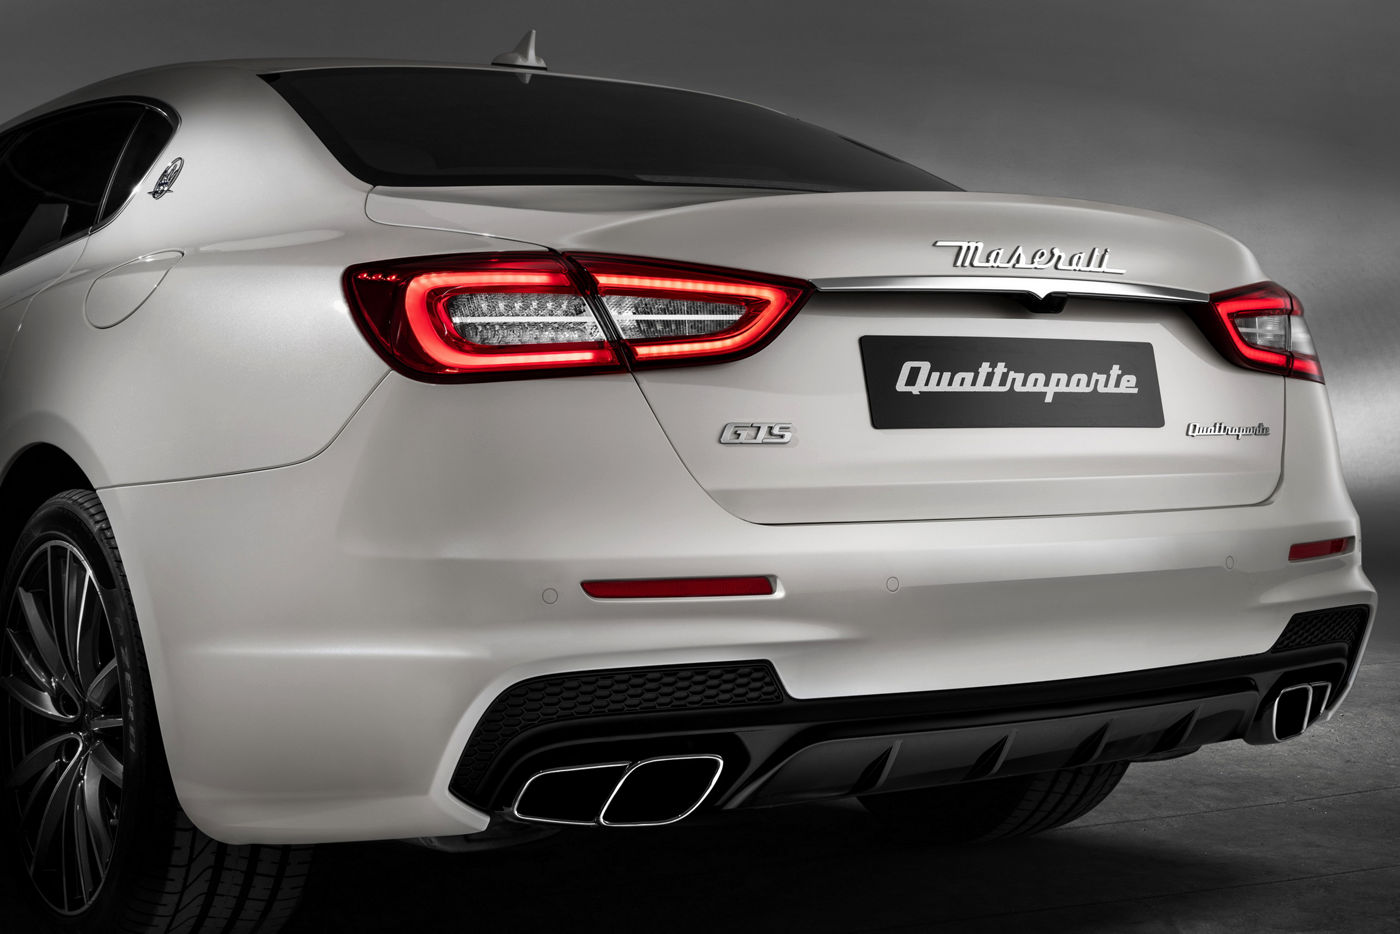 Quattroporte GTS – front view of the luxury sedan in Bianco color